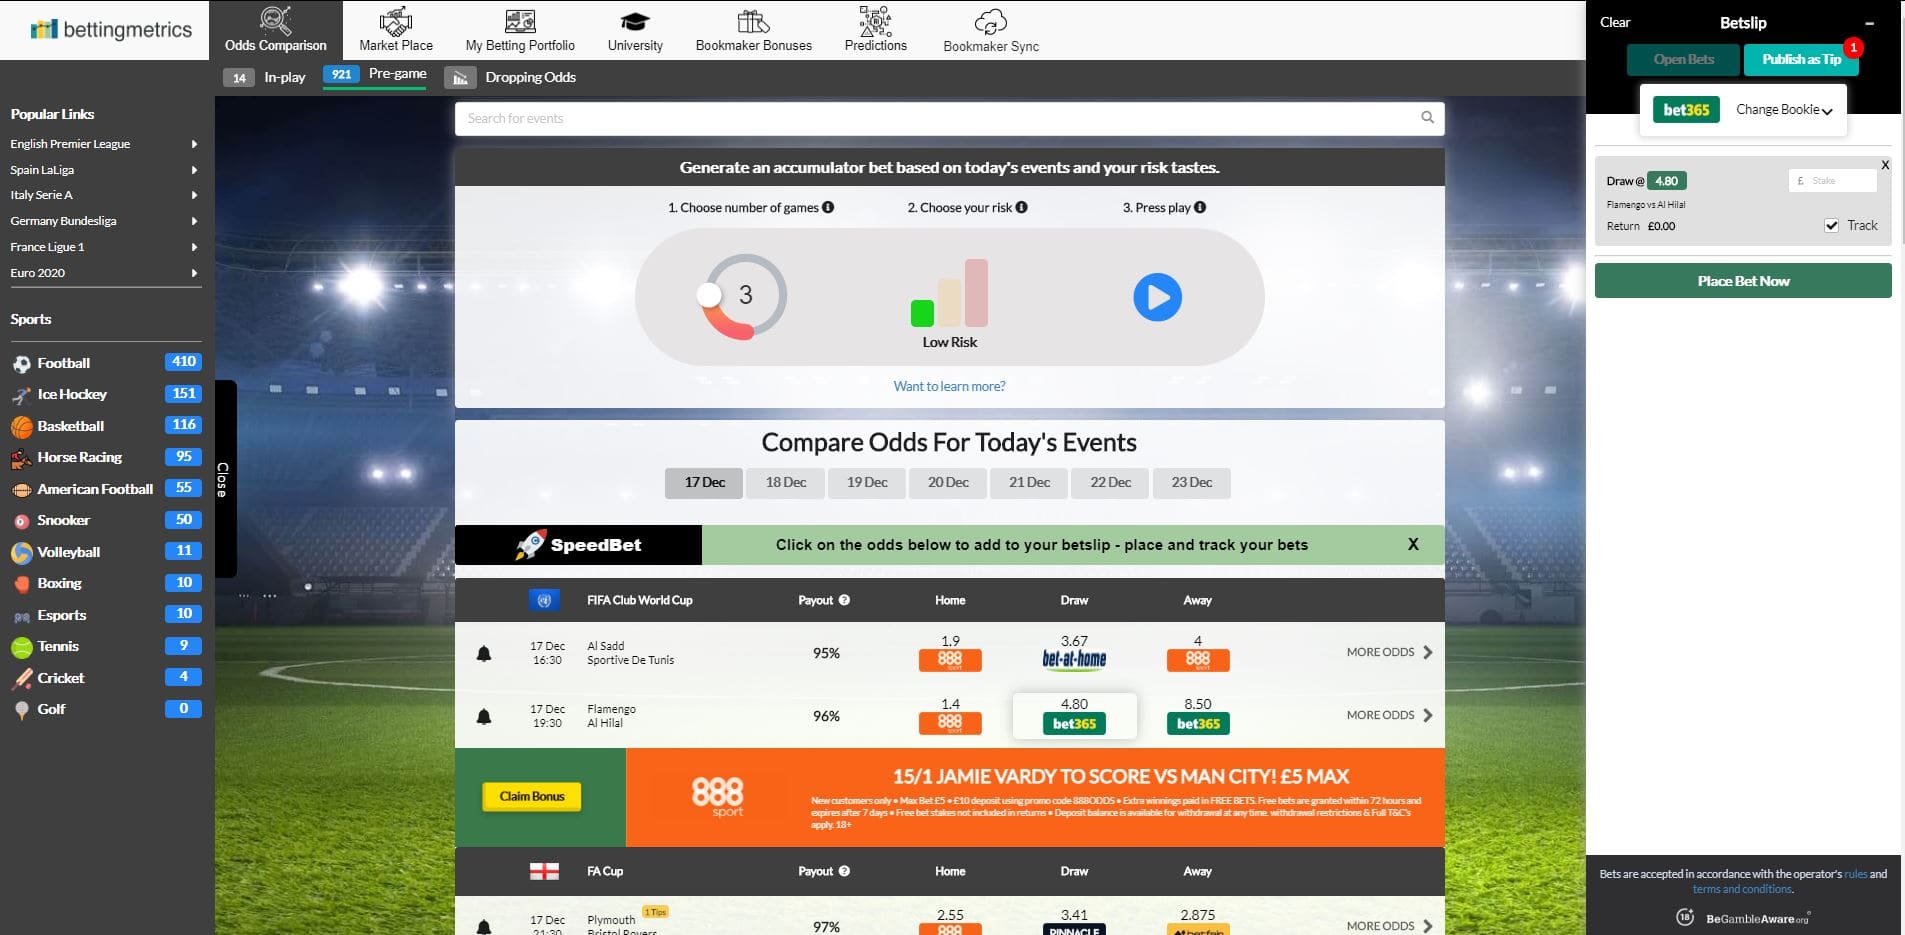 Track automatically all bets placed from Betting.com odds comparison